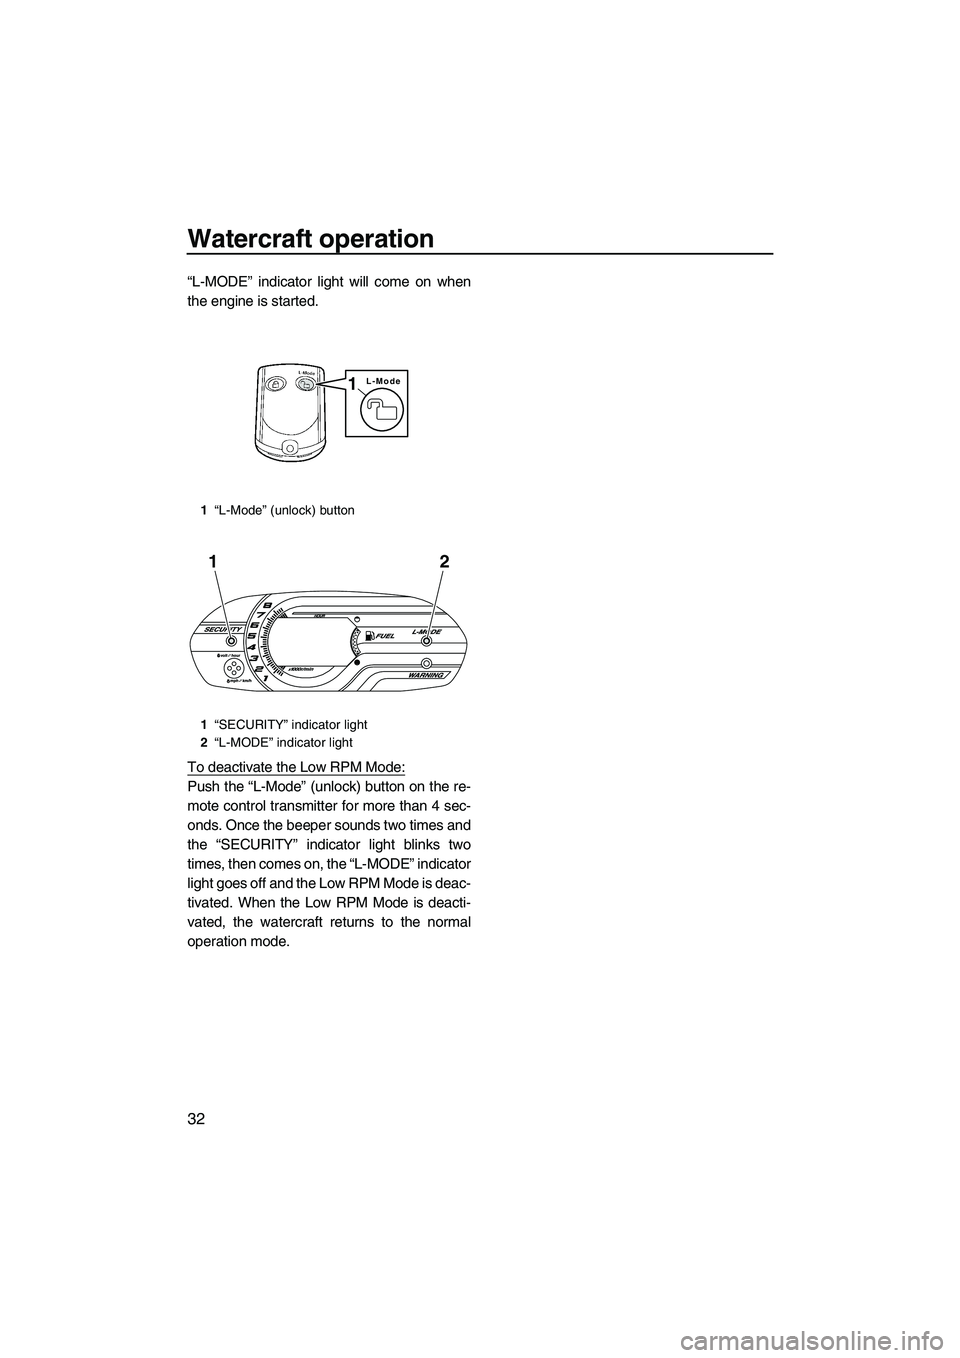 YAMAHA VX DELUXE 2013  Owners Manual Watercraft operation
32
“L-MODE” indicator light will come on when
the engine is started.
To deactivate the Low RPM Mode:
Push the “L-Mode” (unlock) button on the re-
mote control transmitter 